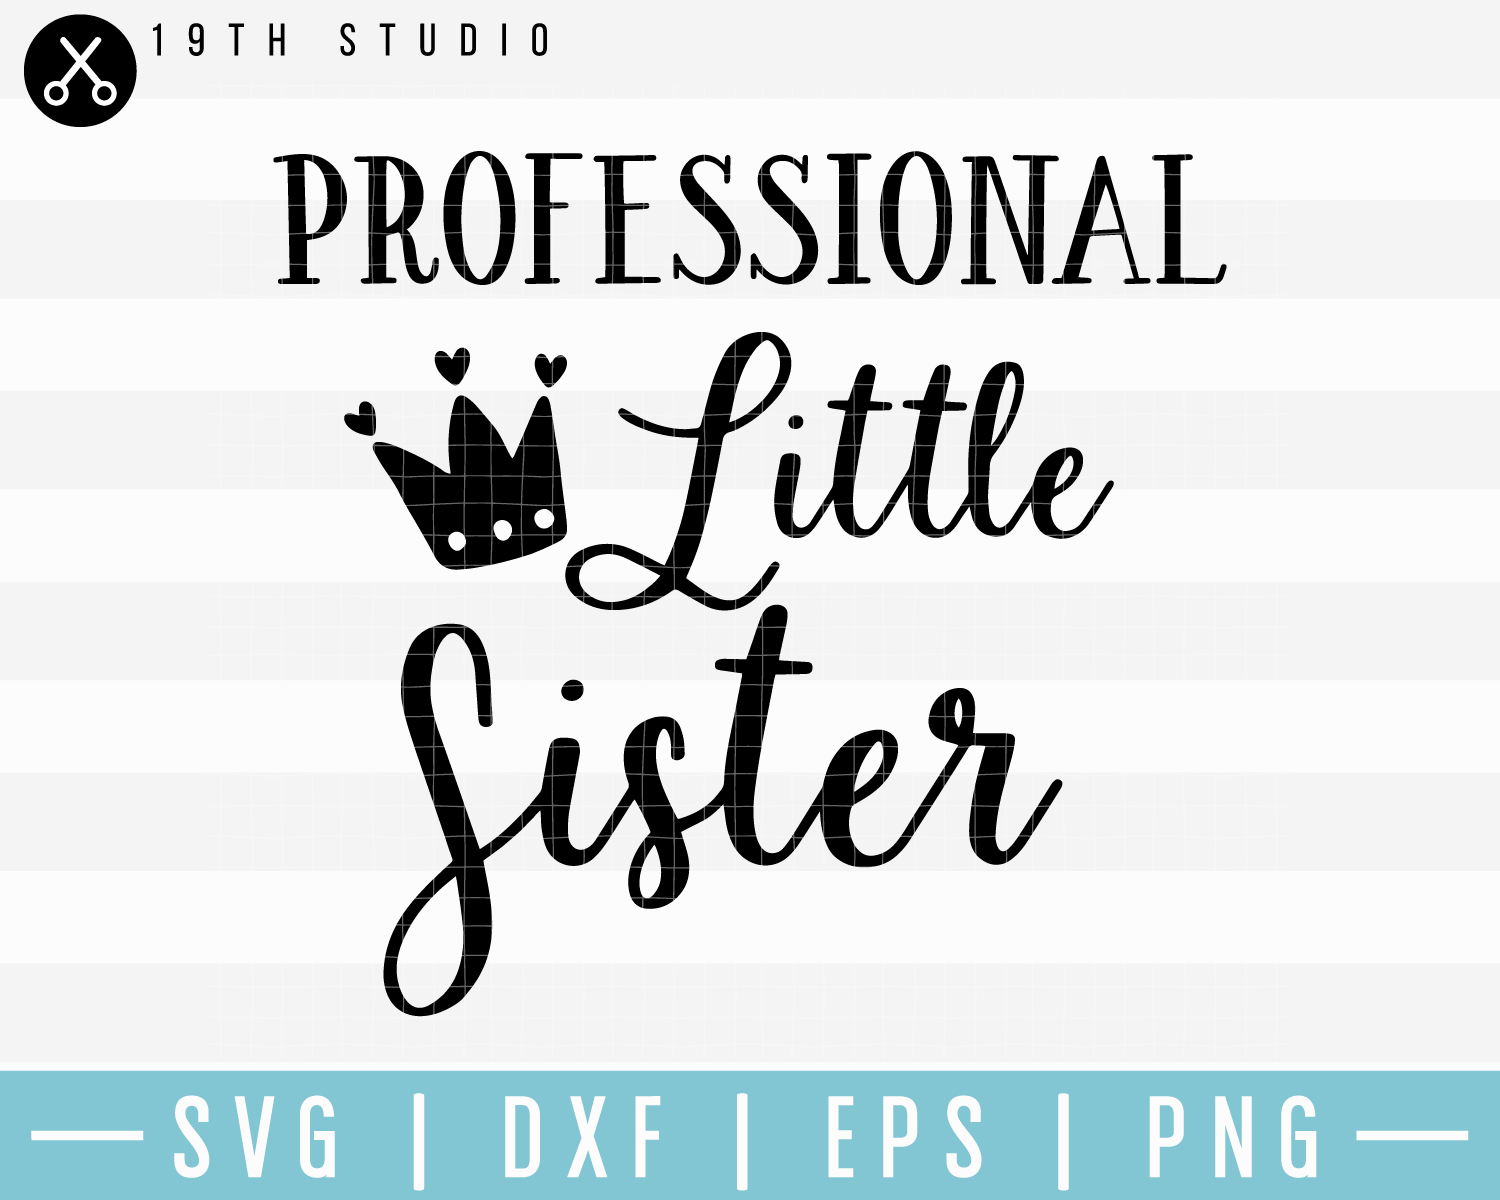 Professional Little Sister SVG | M17F16 Craft House SVG - SVG files for Cricut and Silhouette